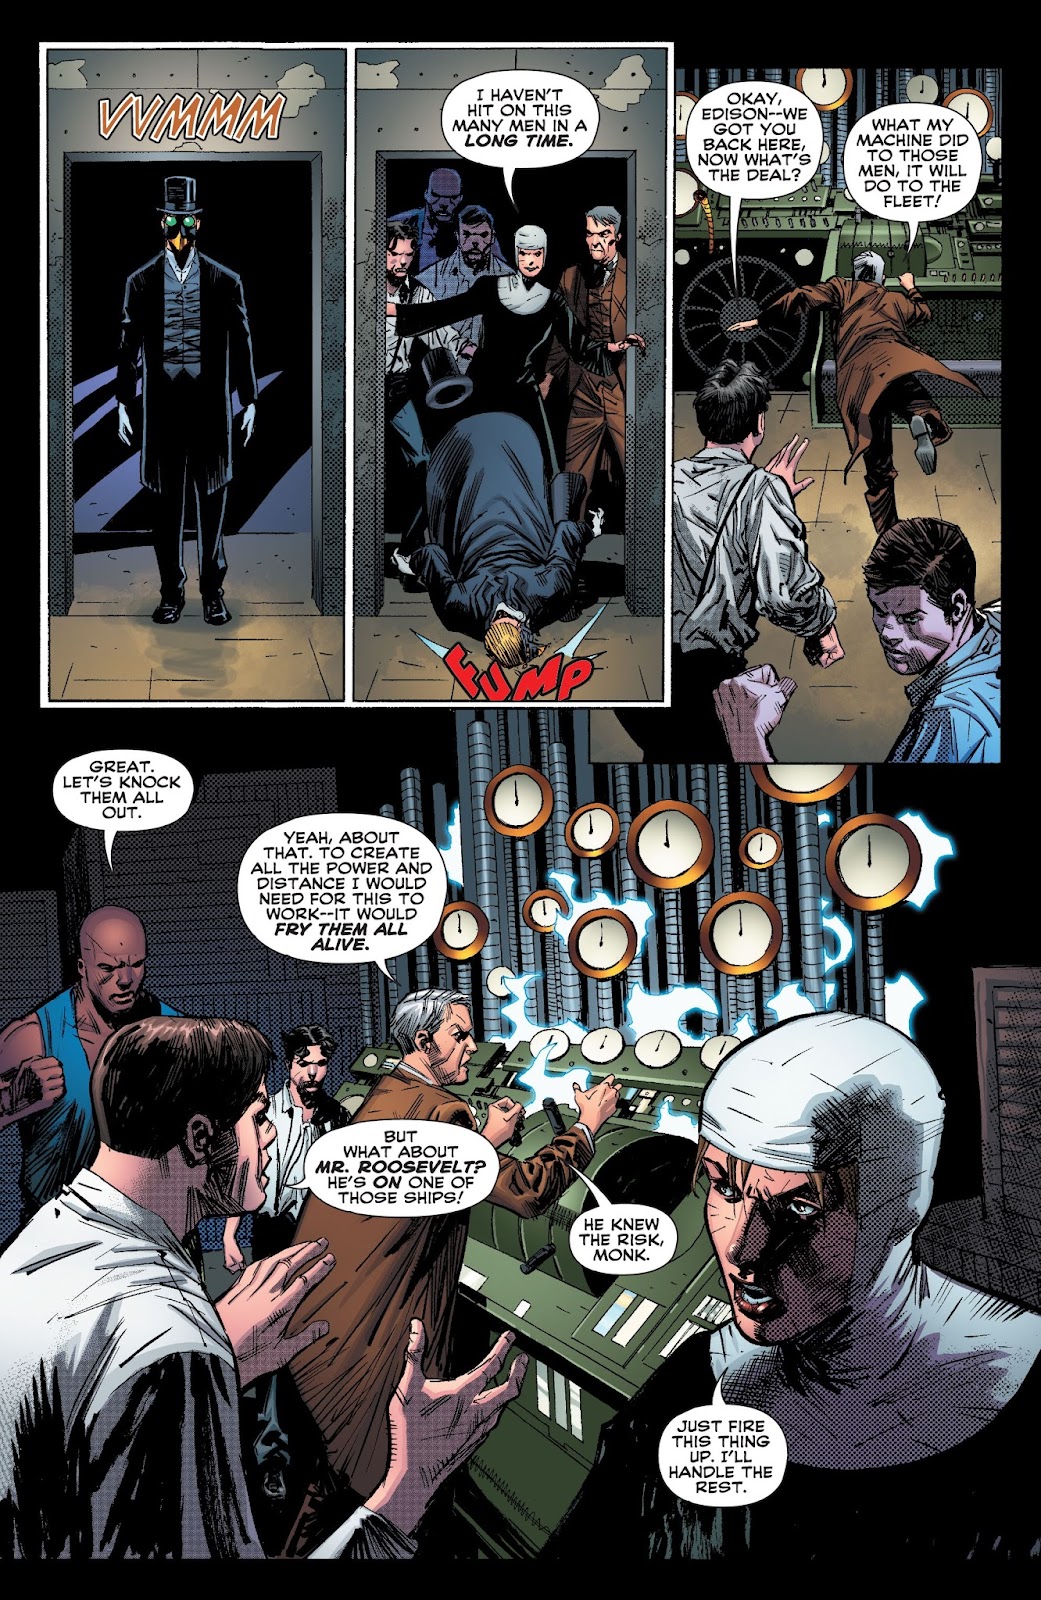 Rough Riders: Riders on the Storm issue 6 - Page 12